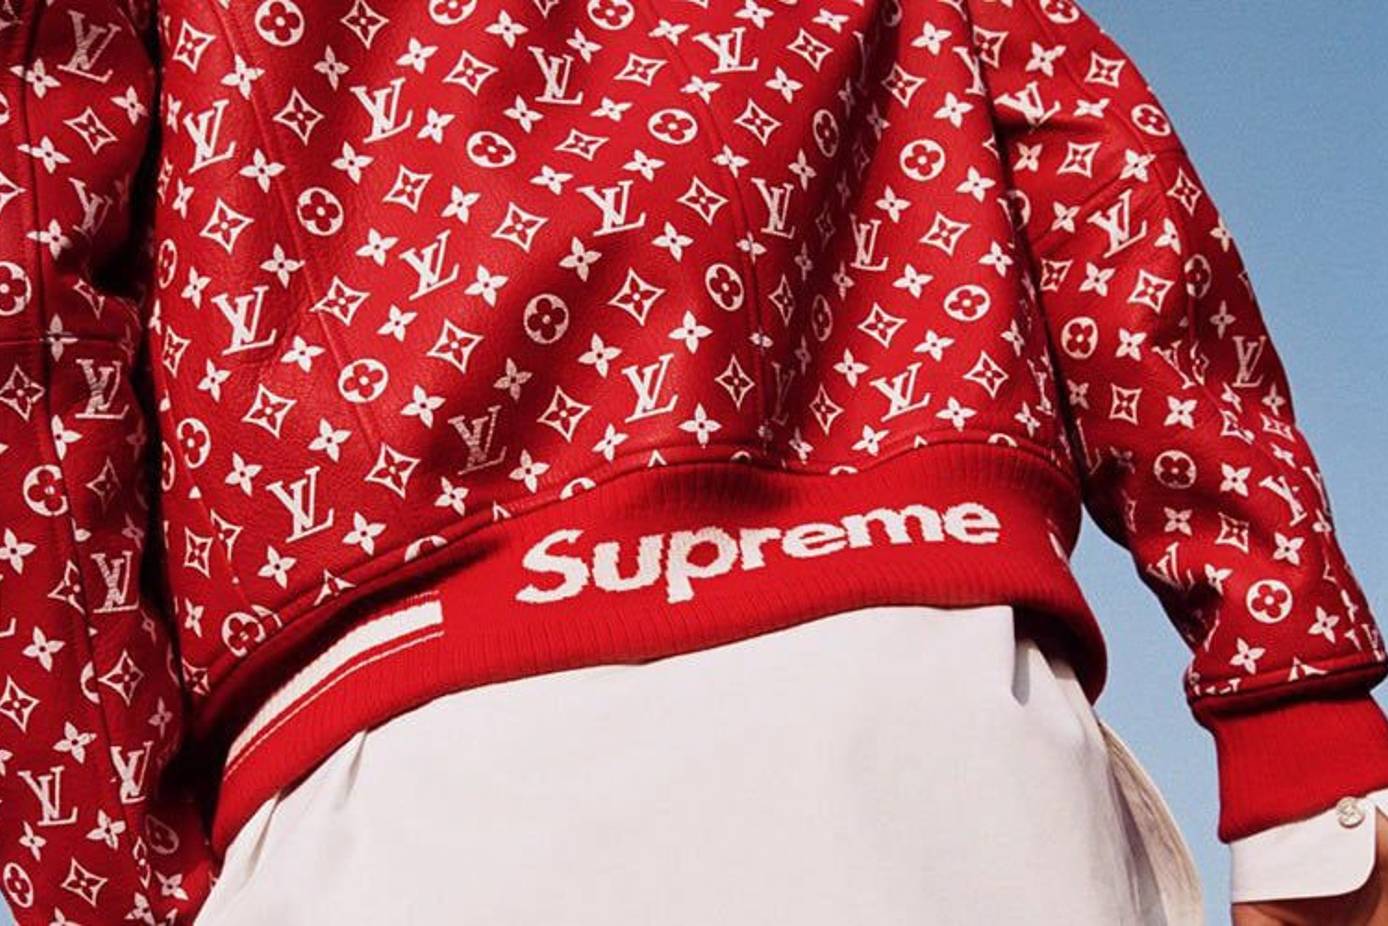 The Rise of Supreme - From a skate store to a billion dollar